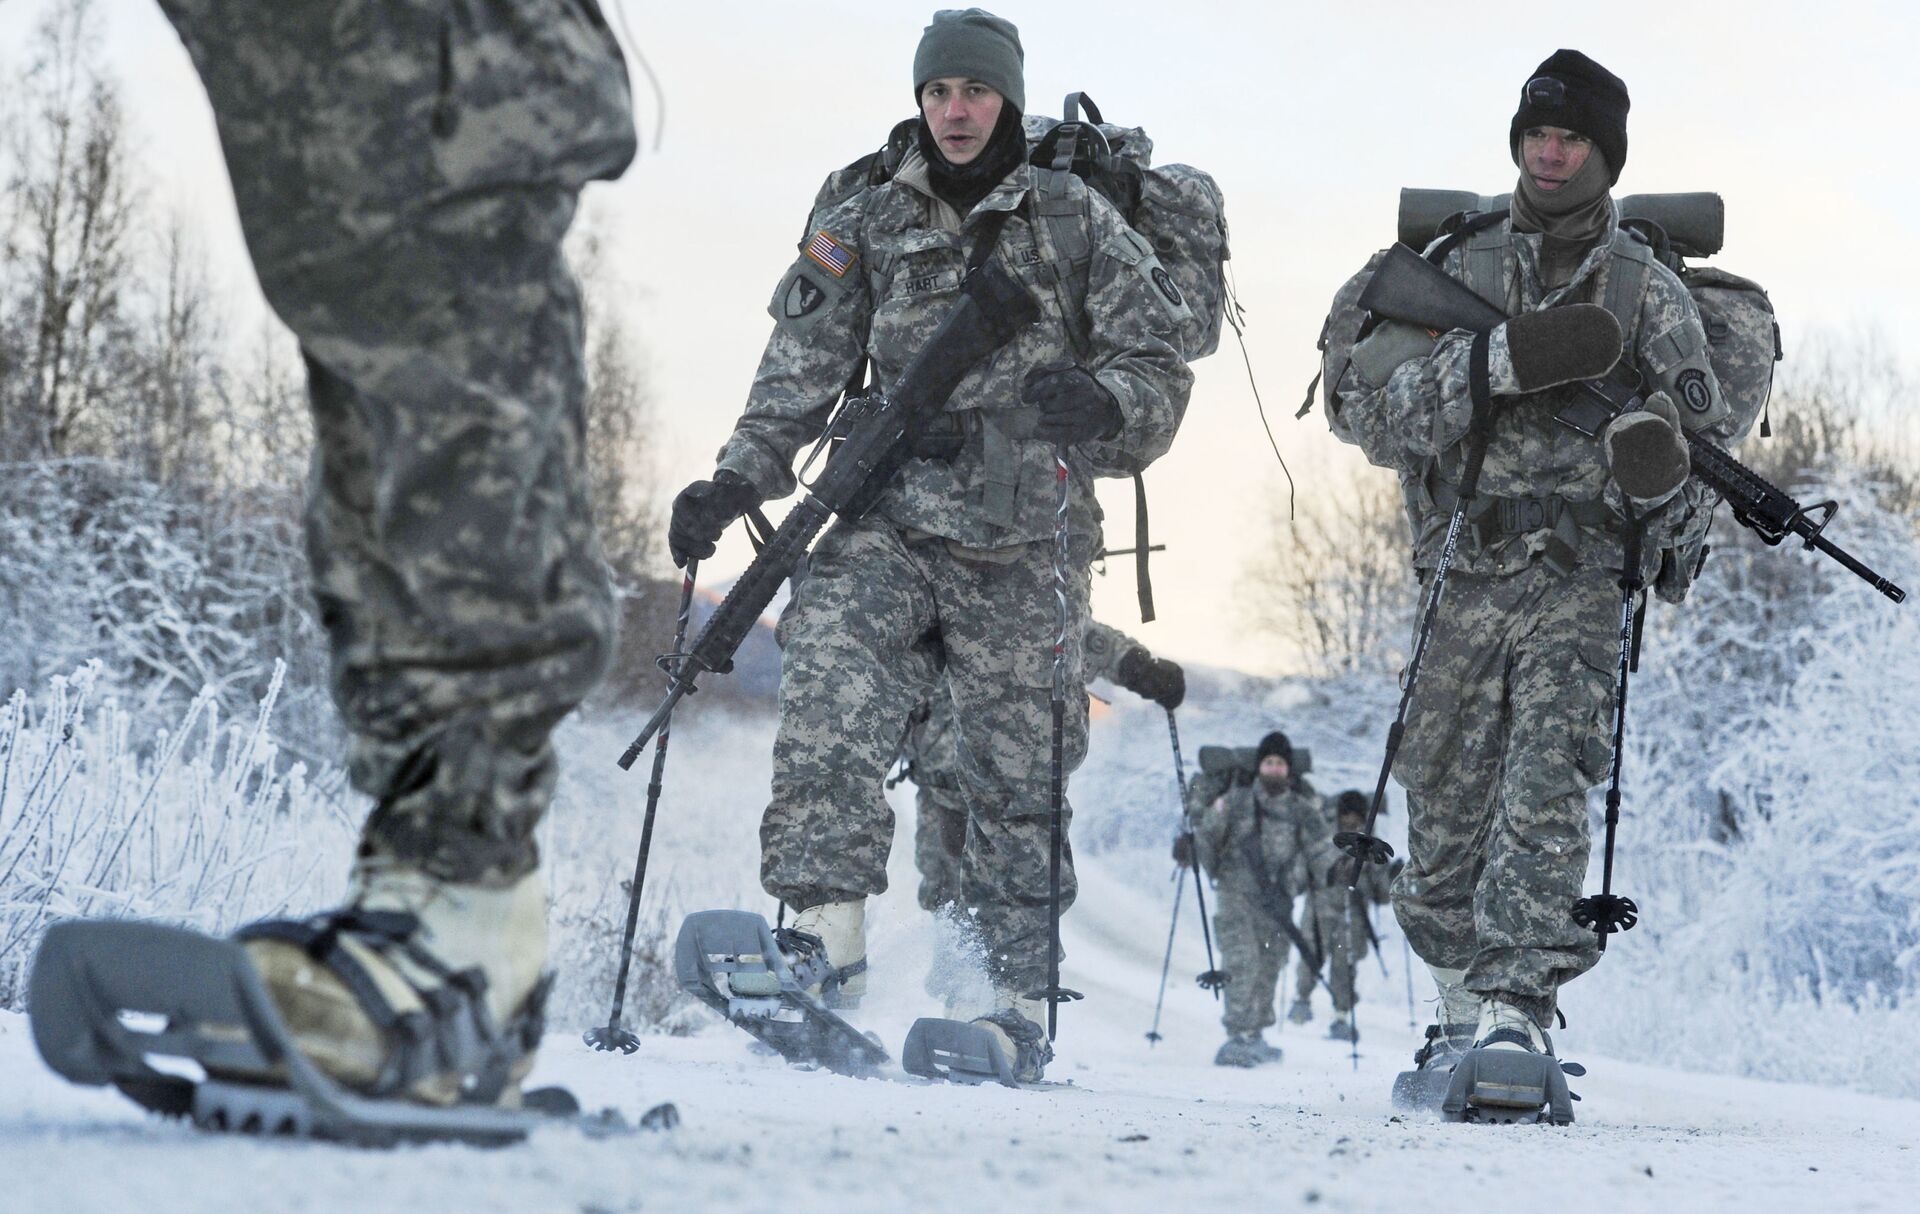 Pivot to Arctic: What's Behind US-NATO Military Buildup in High North? - Sputnik International, 1920, 22.05.2021